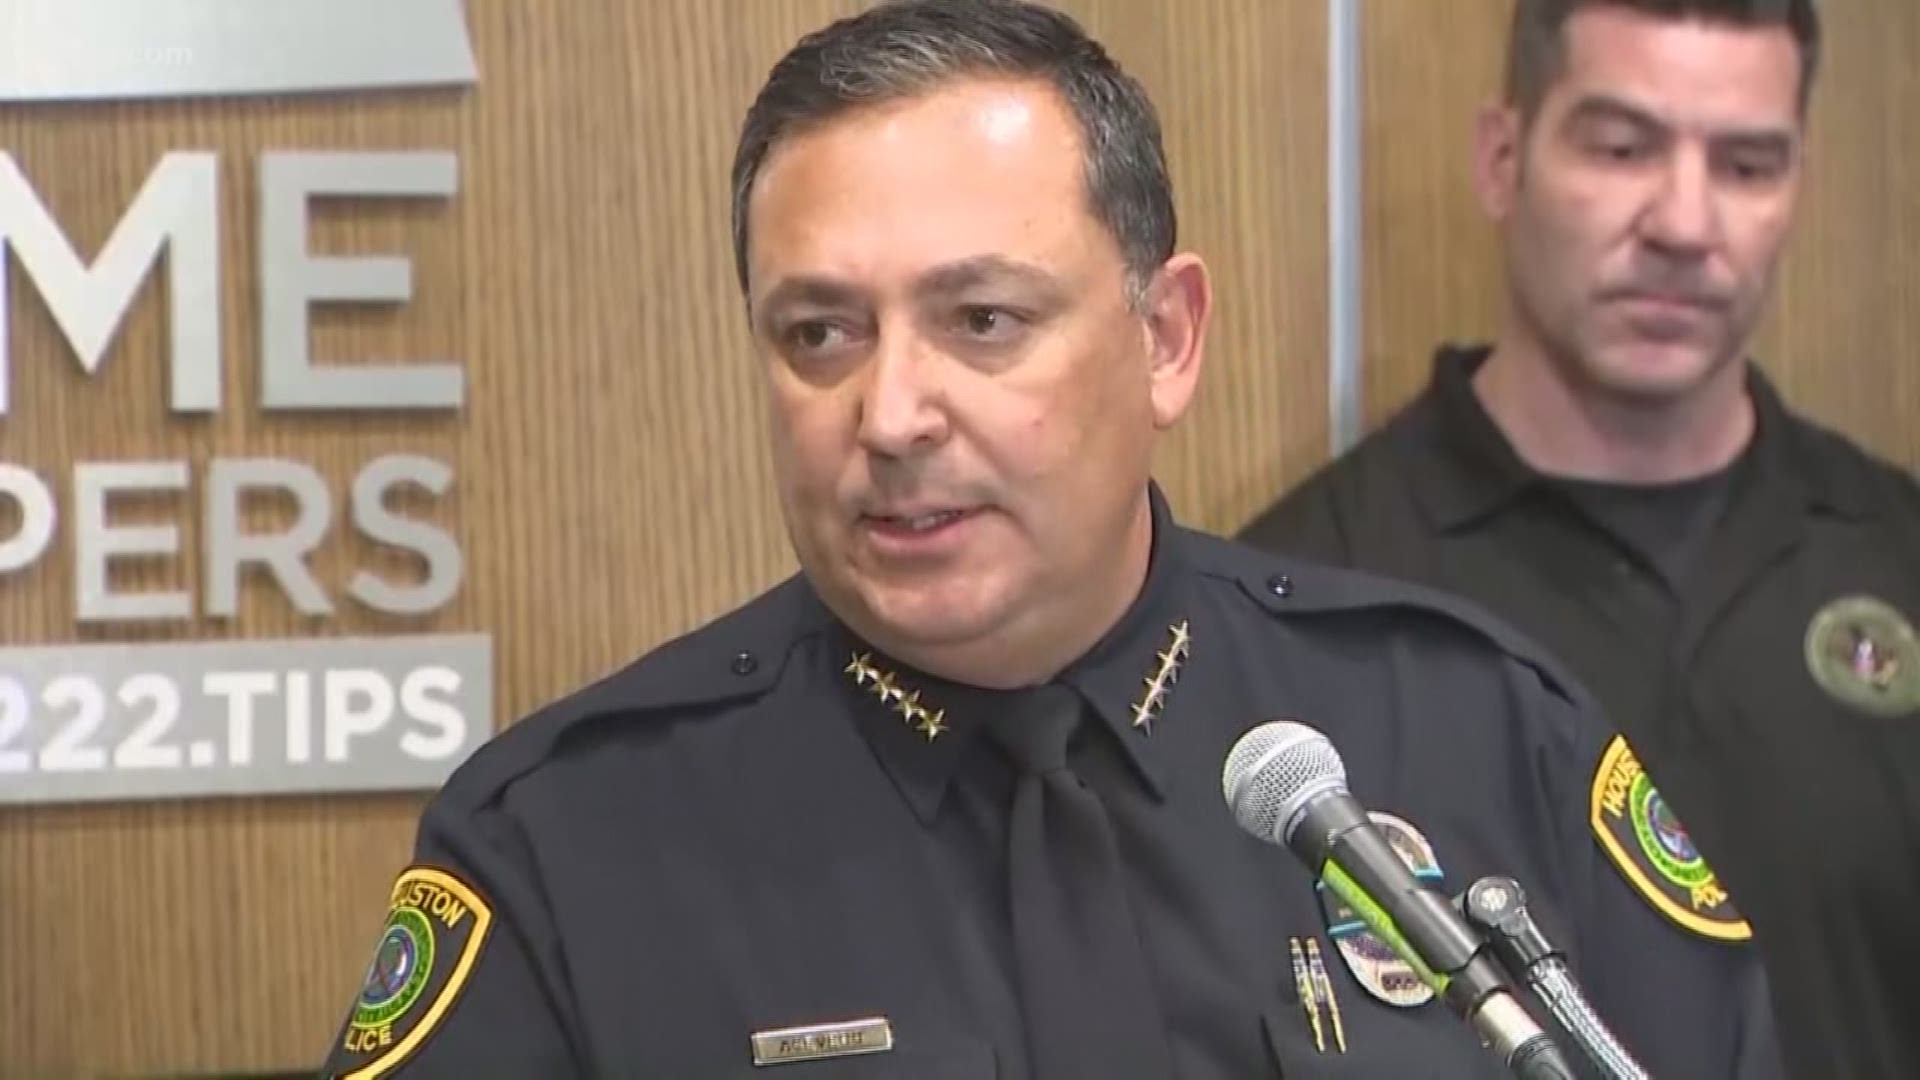 After a sergeant’s murder over the weekend, Houston Police Chief Art Acevedo called out U.S. Senators and the NRA over the country’s gun laws.